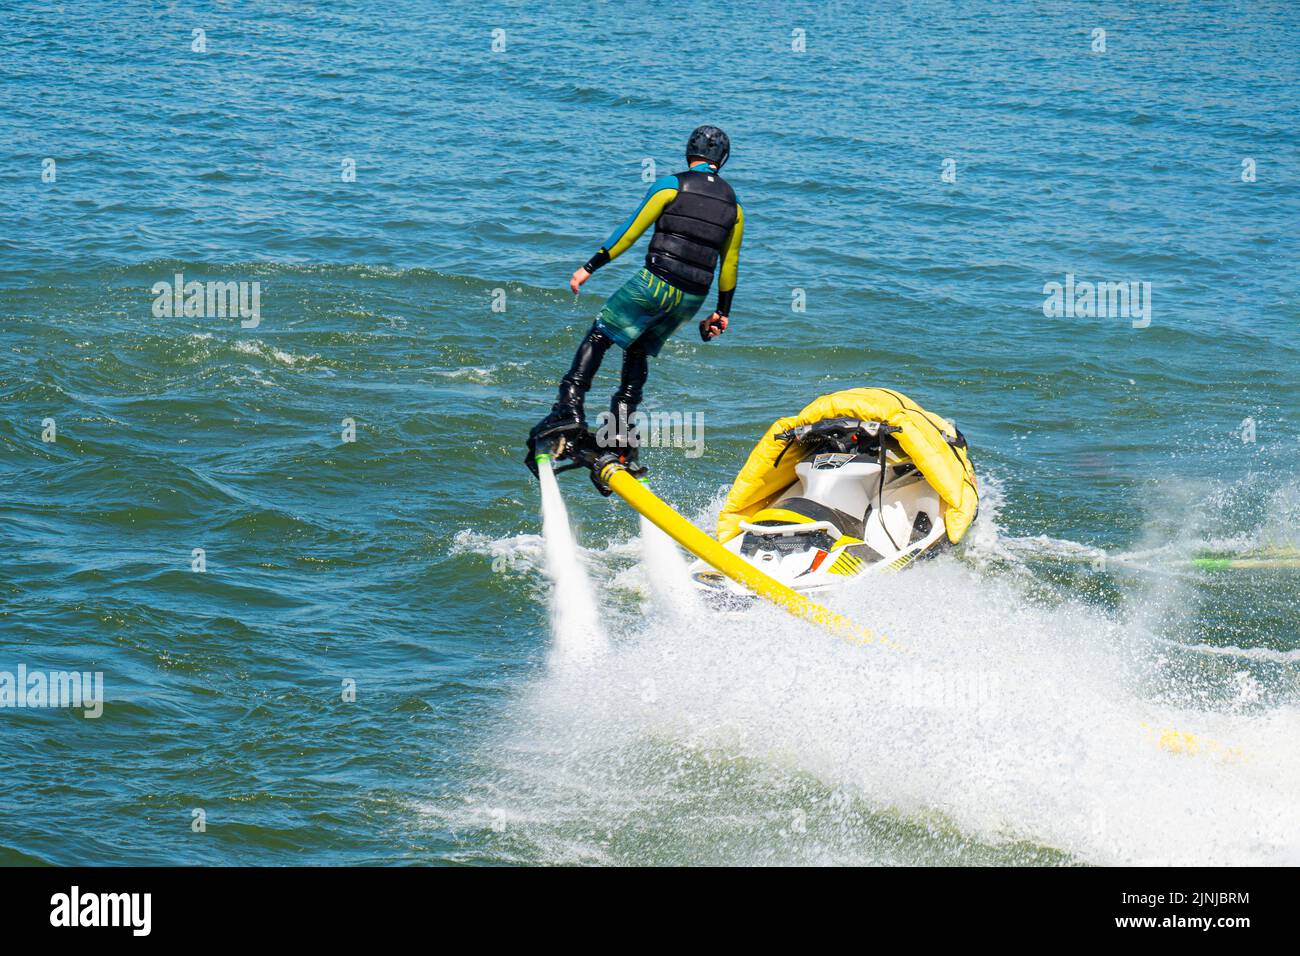 Fly board show at the port. Extreme sport Stock Photo